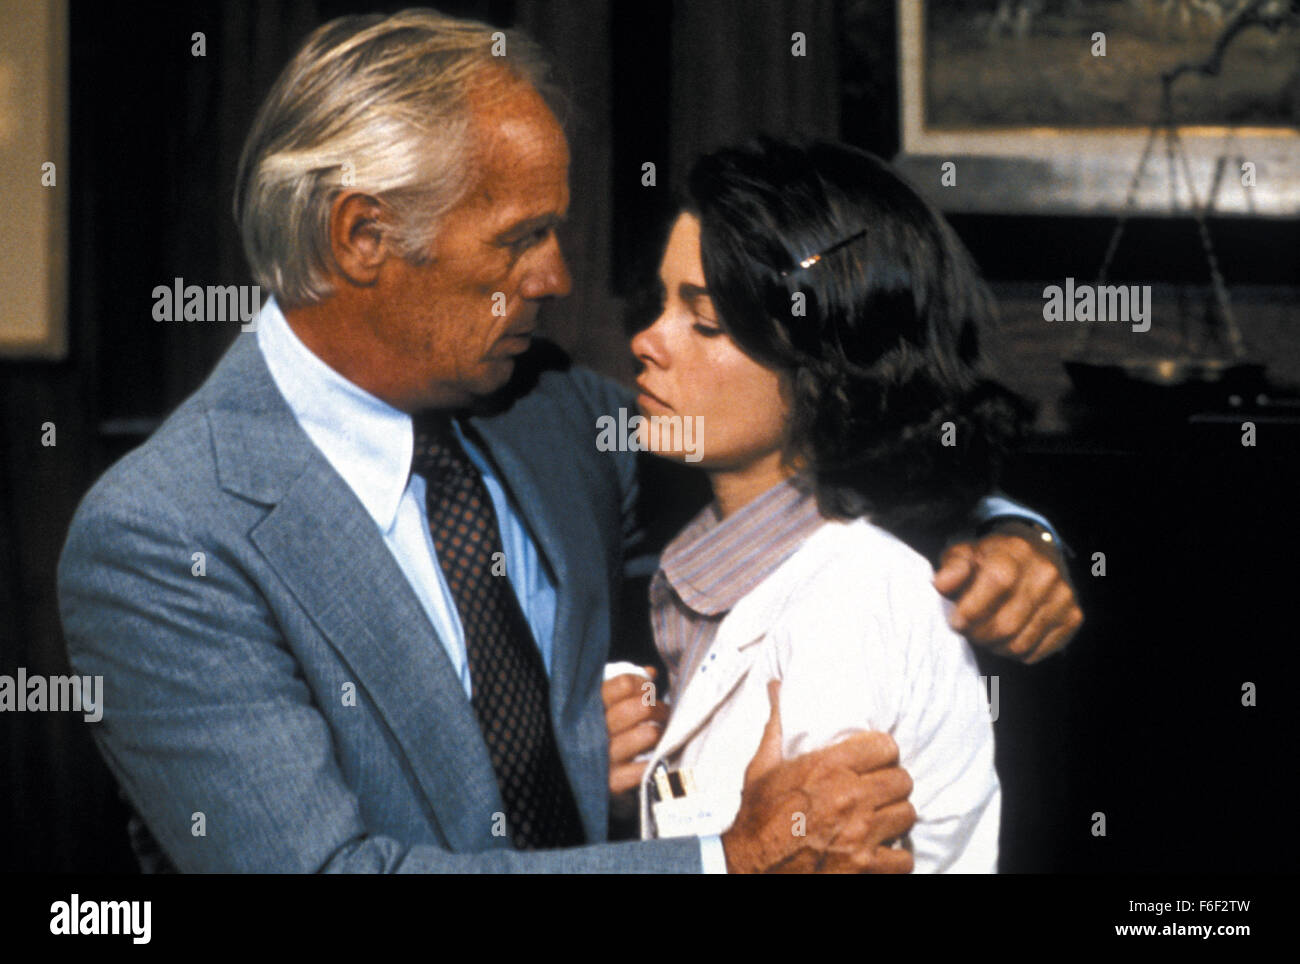 Jan 06, 1978; Los Angeles, CA, USA; RICHARD WIDMARK as Dr. George A. Harris and GENEVIEVE BUJOLD as Dr Susan Wheeler in the mystery thriller film 'Coma' directed by Michael Crichton. Stock Photo